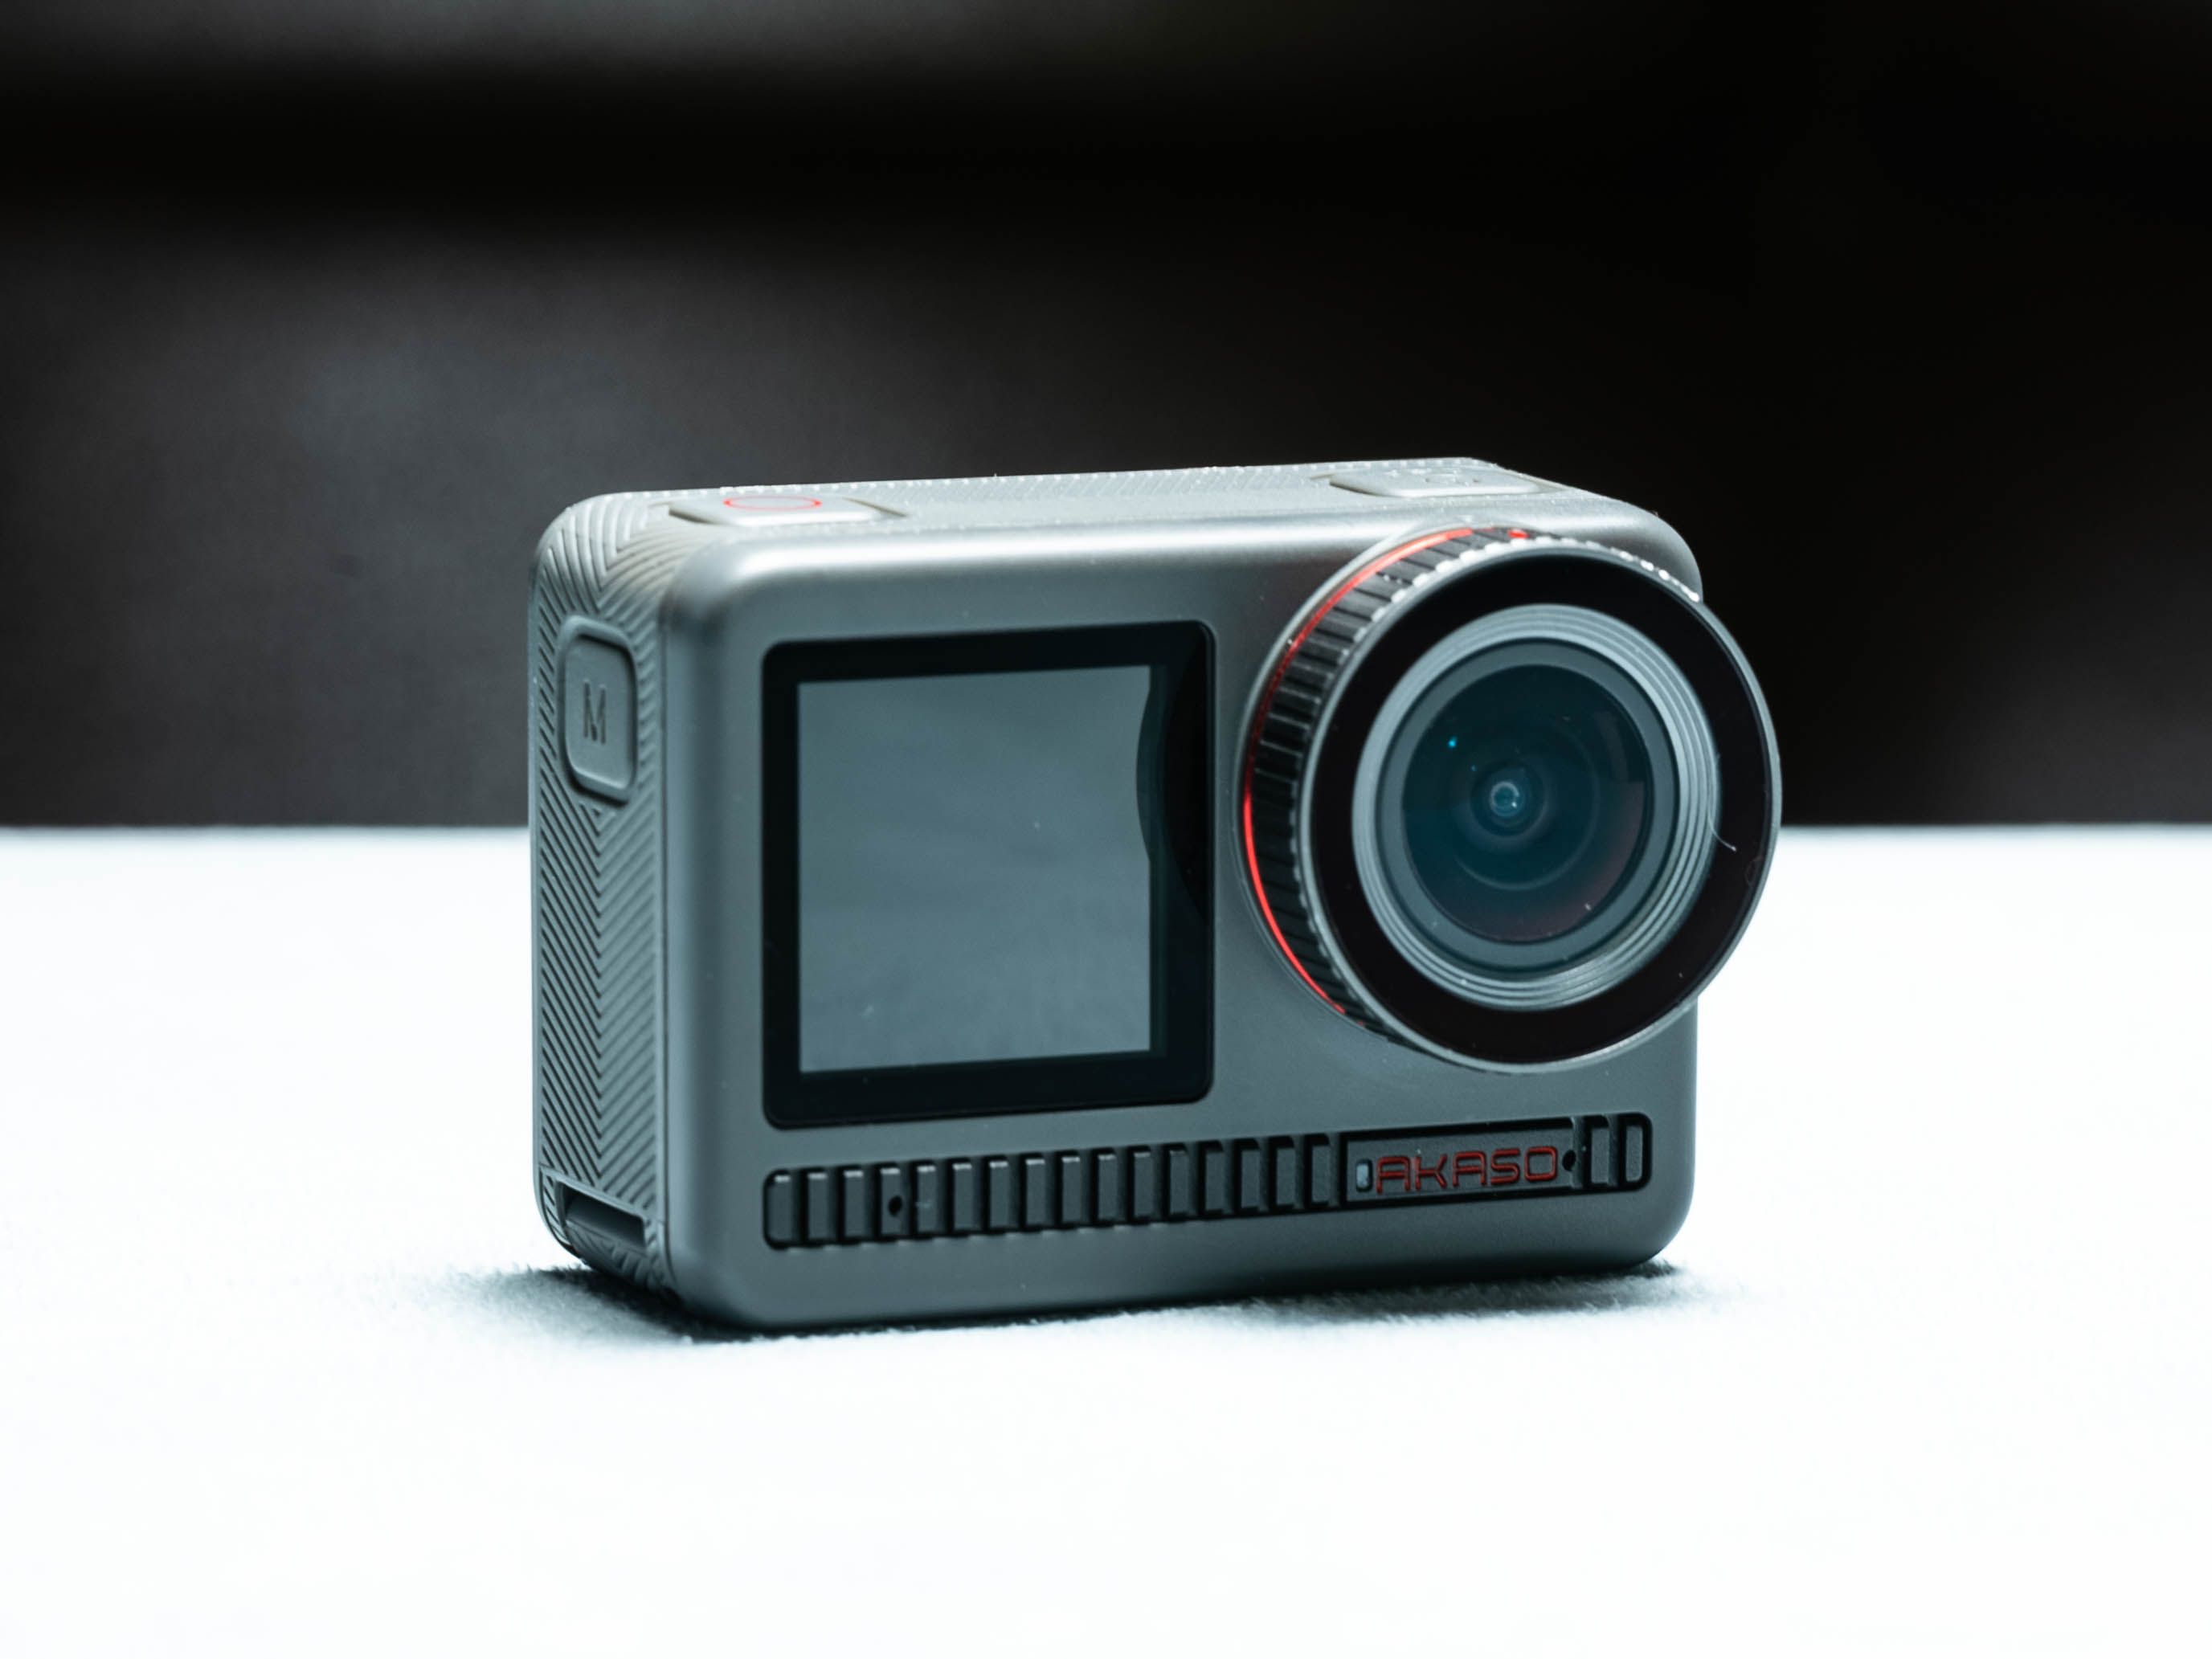  AKASO Brave 8 4K60FPS Action Camera, 48MP Photo Touch